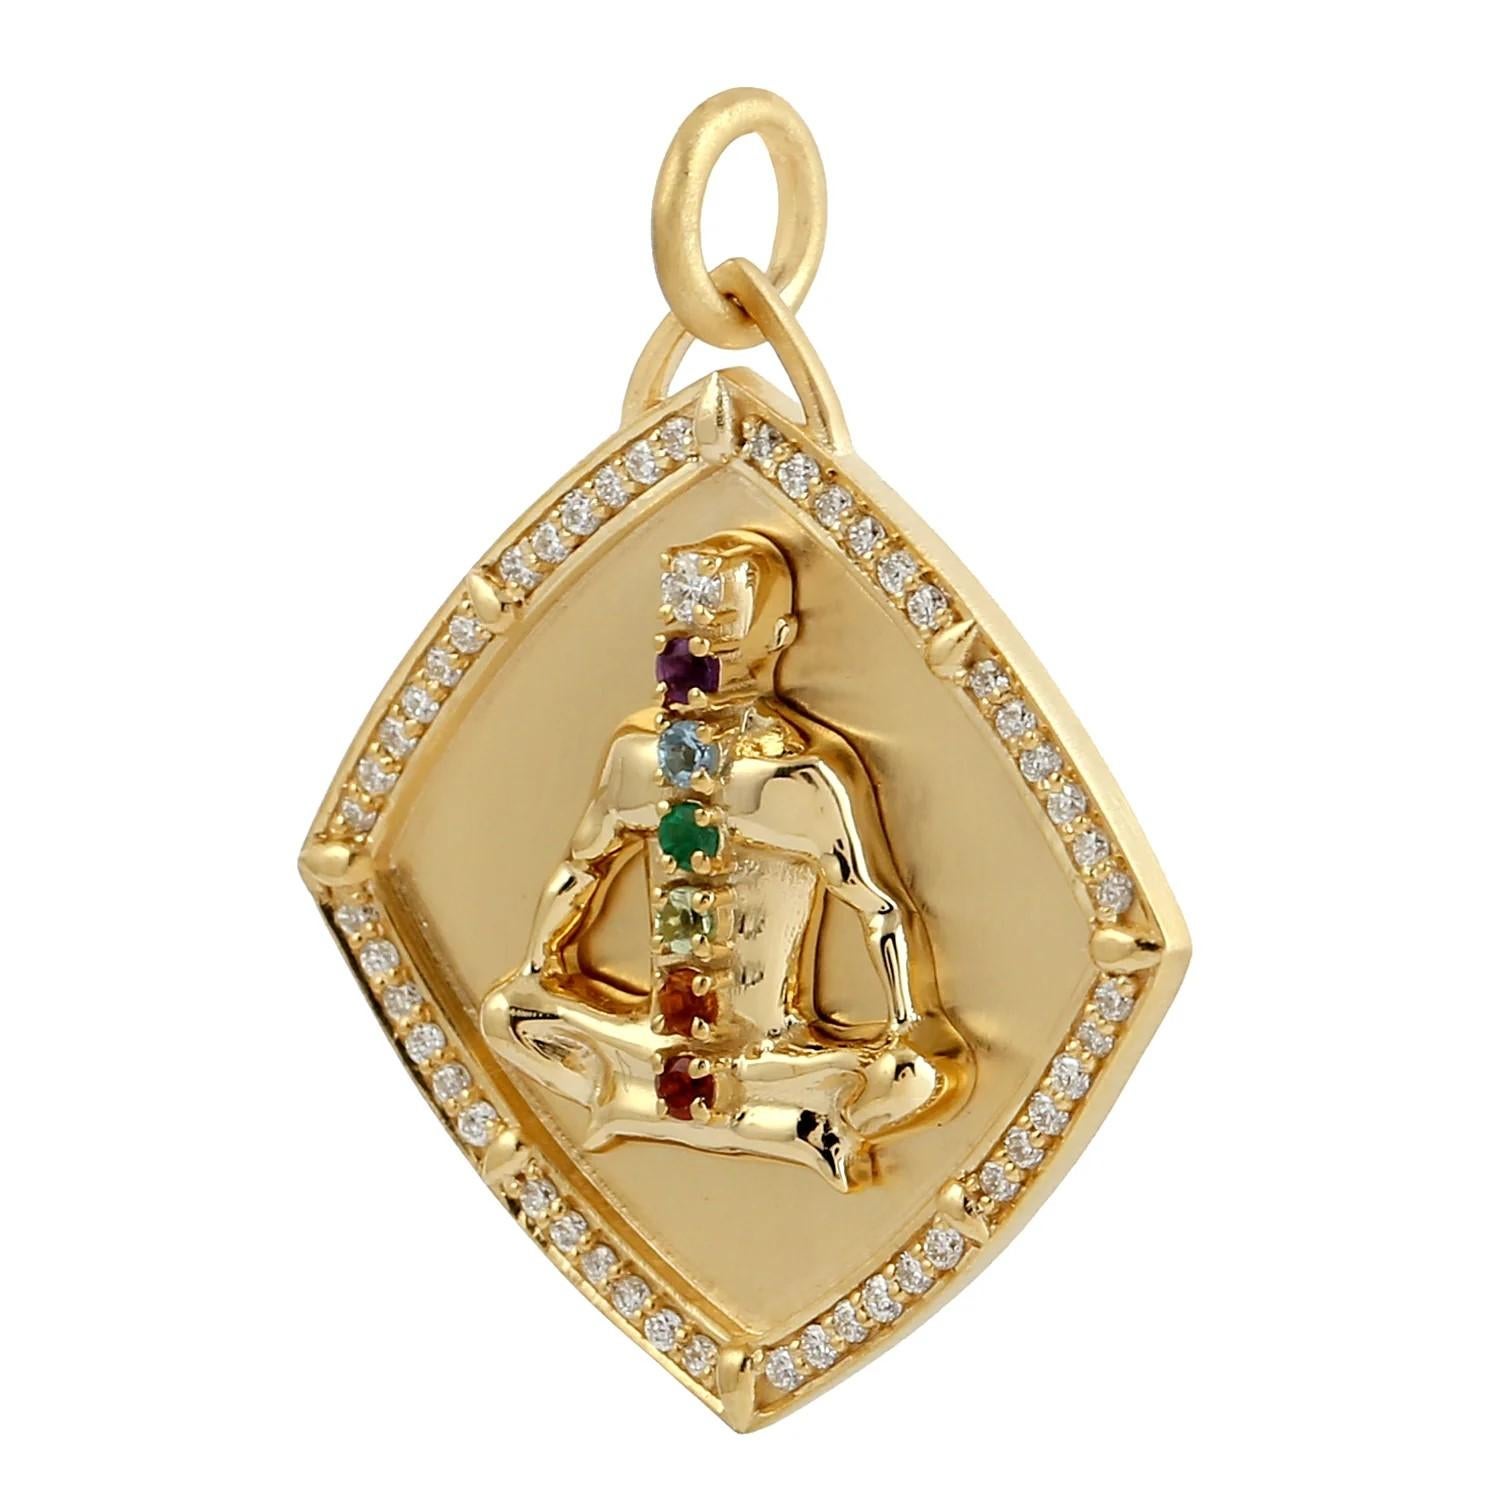 This medallion charm has been meticulously crafted from 14-karat gold and set in mixed gemstones & .28 carats of sparkling diamonds. 

A chakra is an energy center. In a perfectly healthy person, the chakras work in unison to create life-force